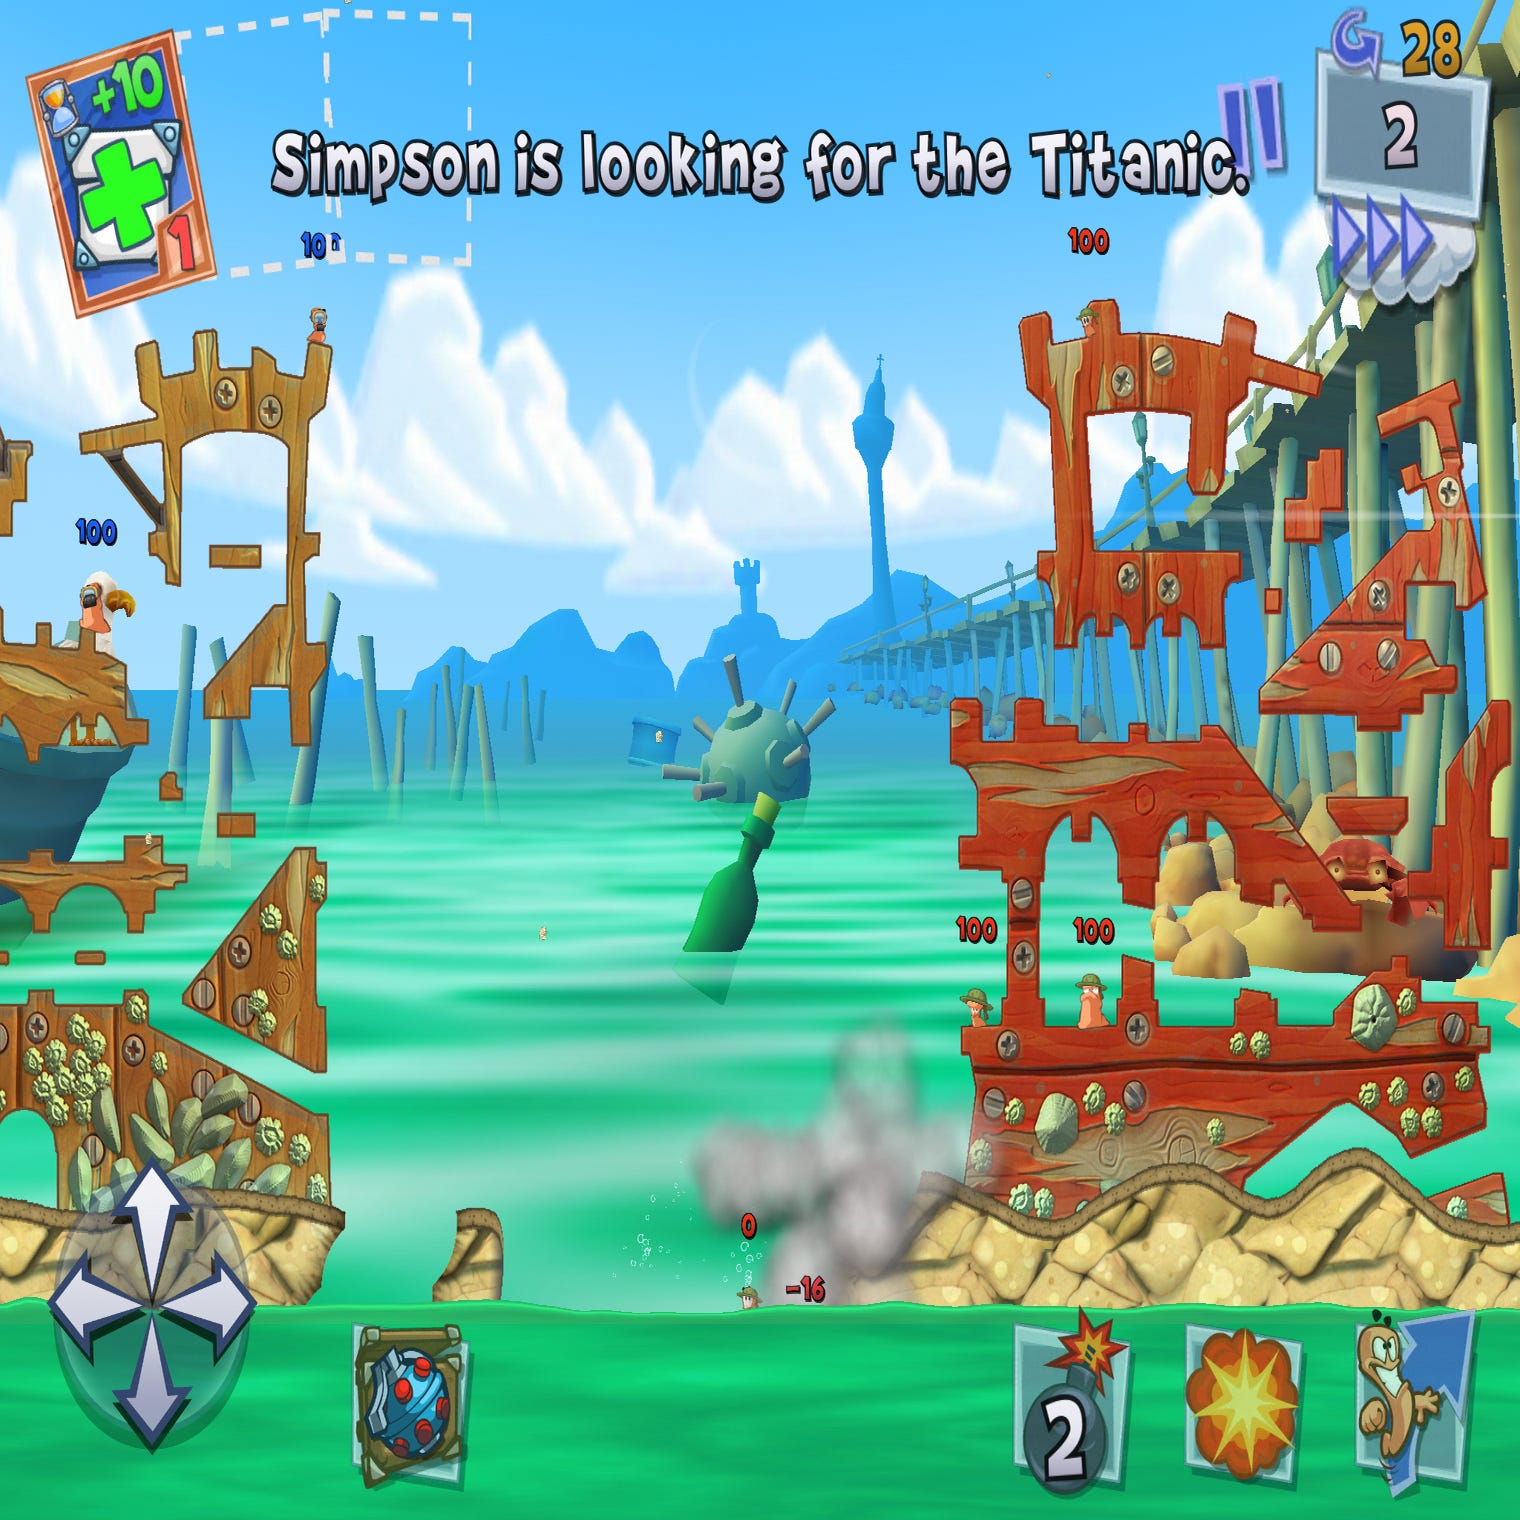 Worms 3 para Android - Download